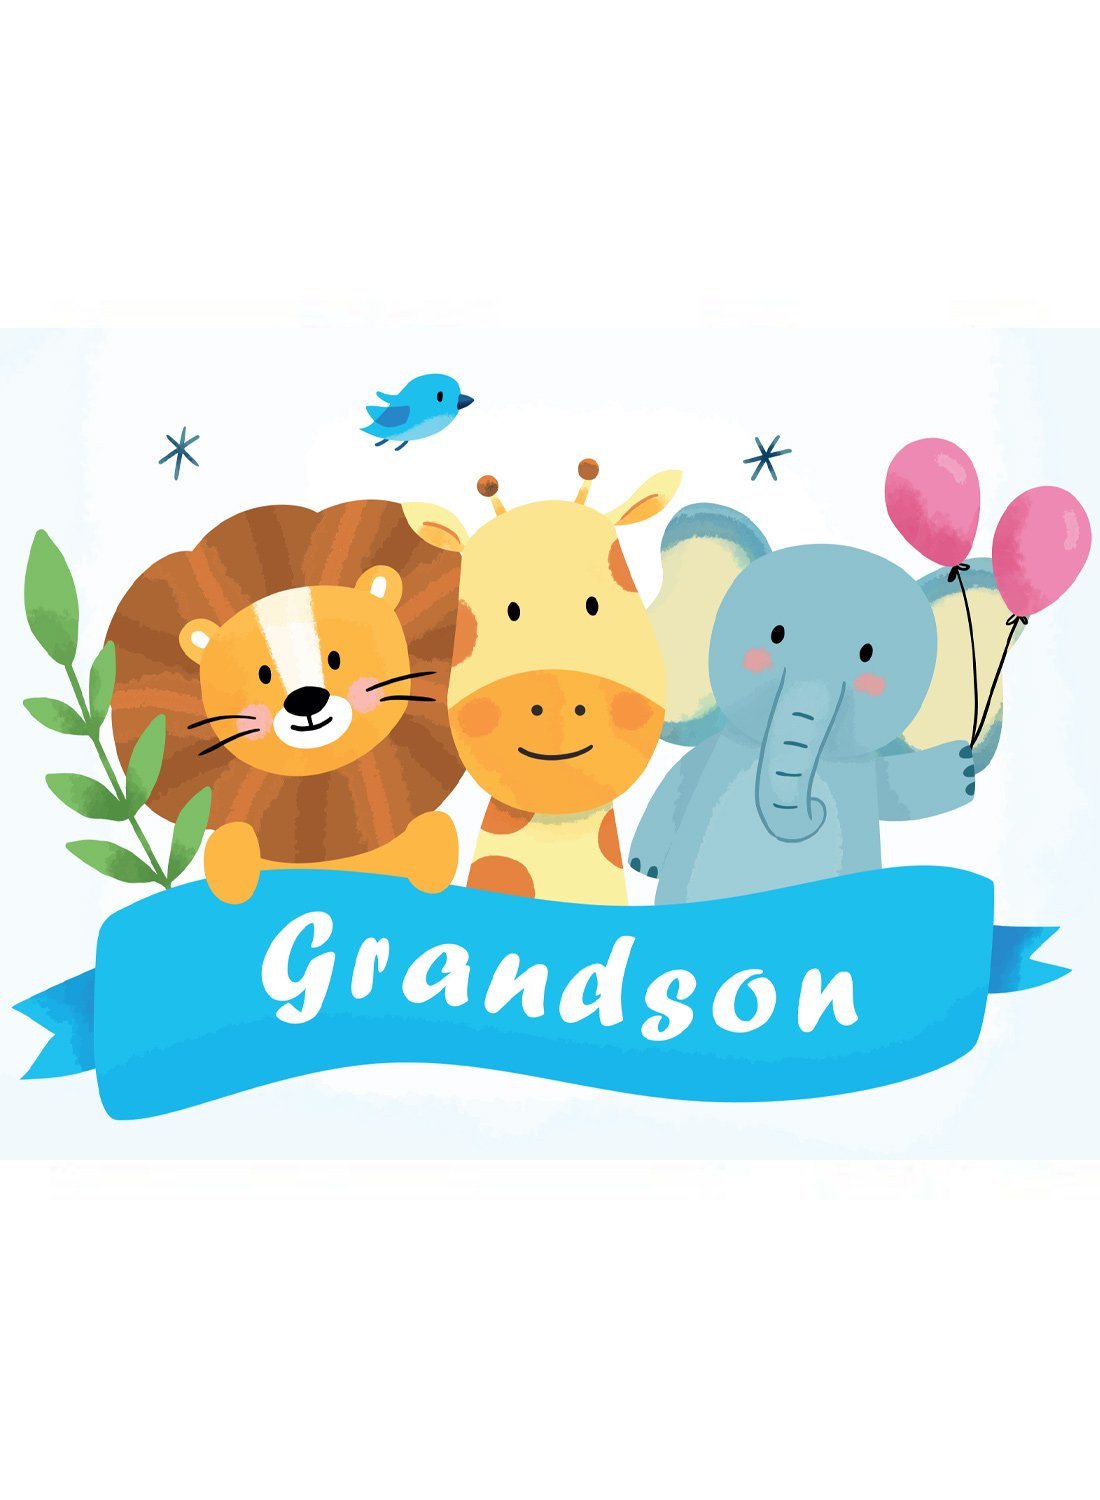 Grandson - New Baby Card - New baby card - Little Mouse Baby Clothing & Gifts